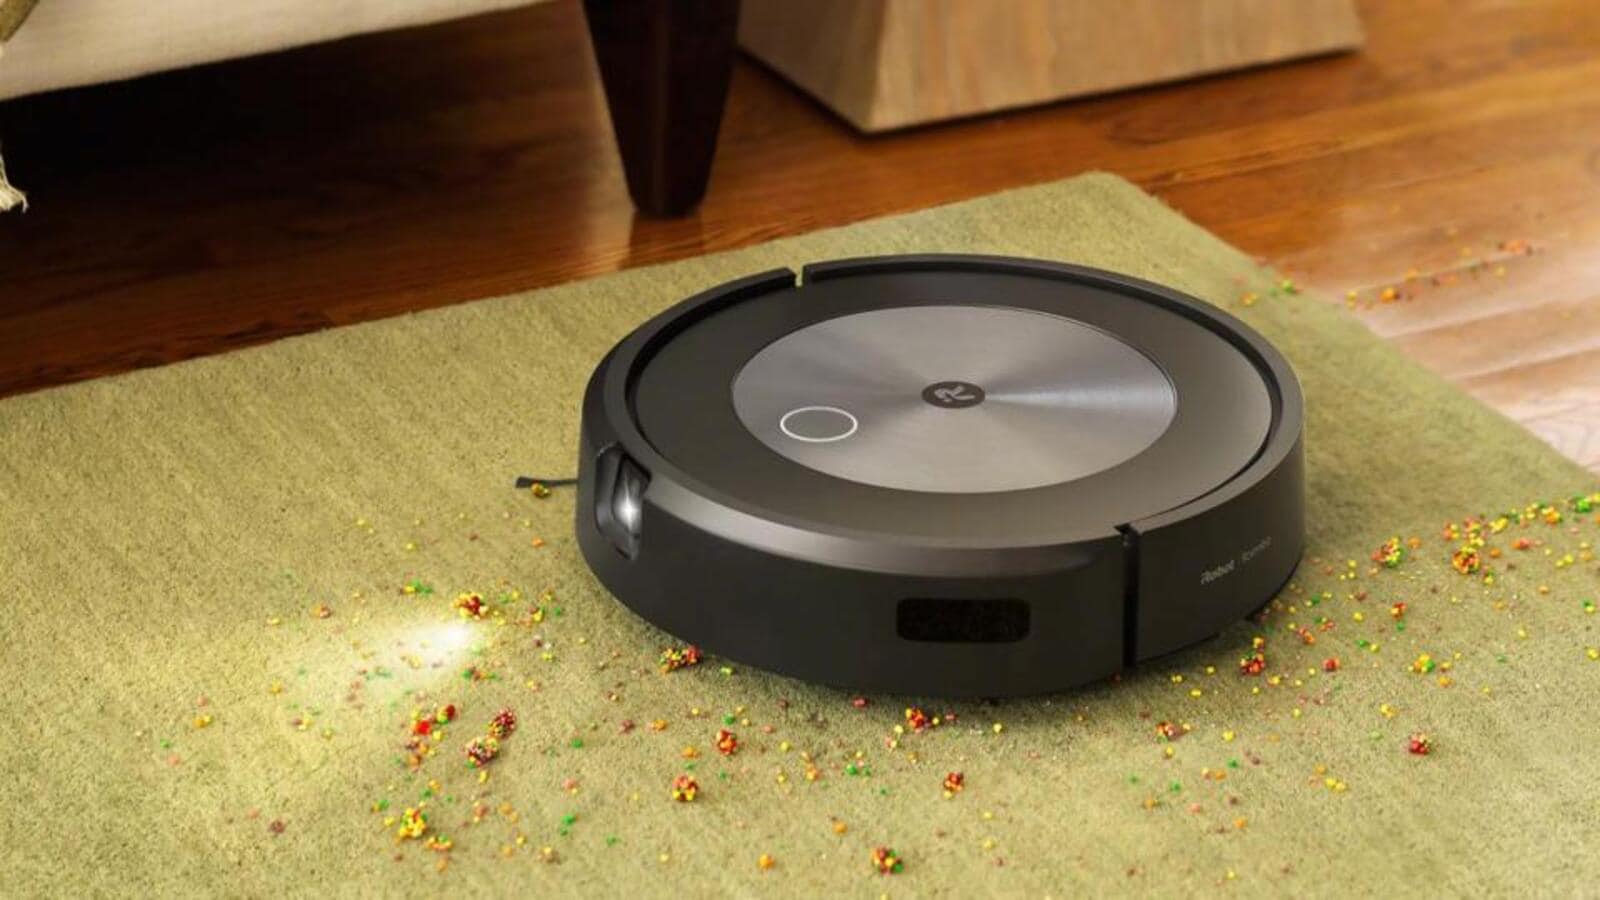 The iRobot Roomba J7+ vacuum cleaner has better vision than its peers